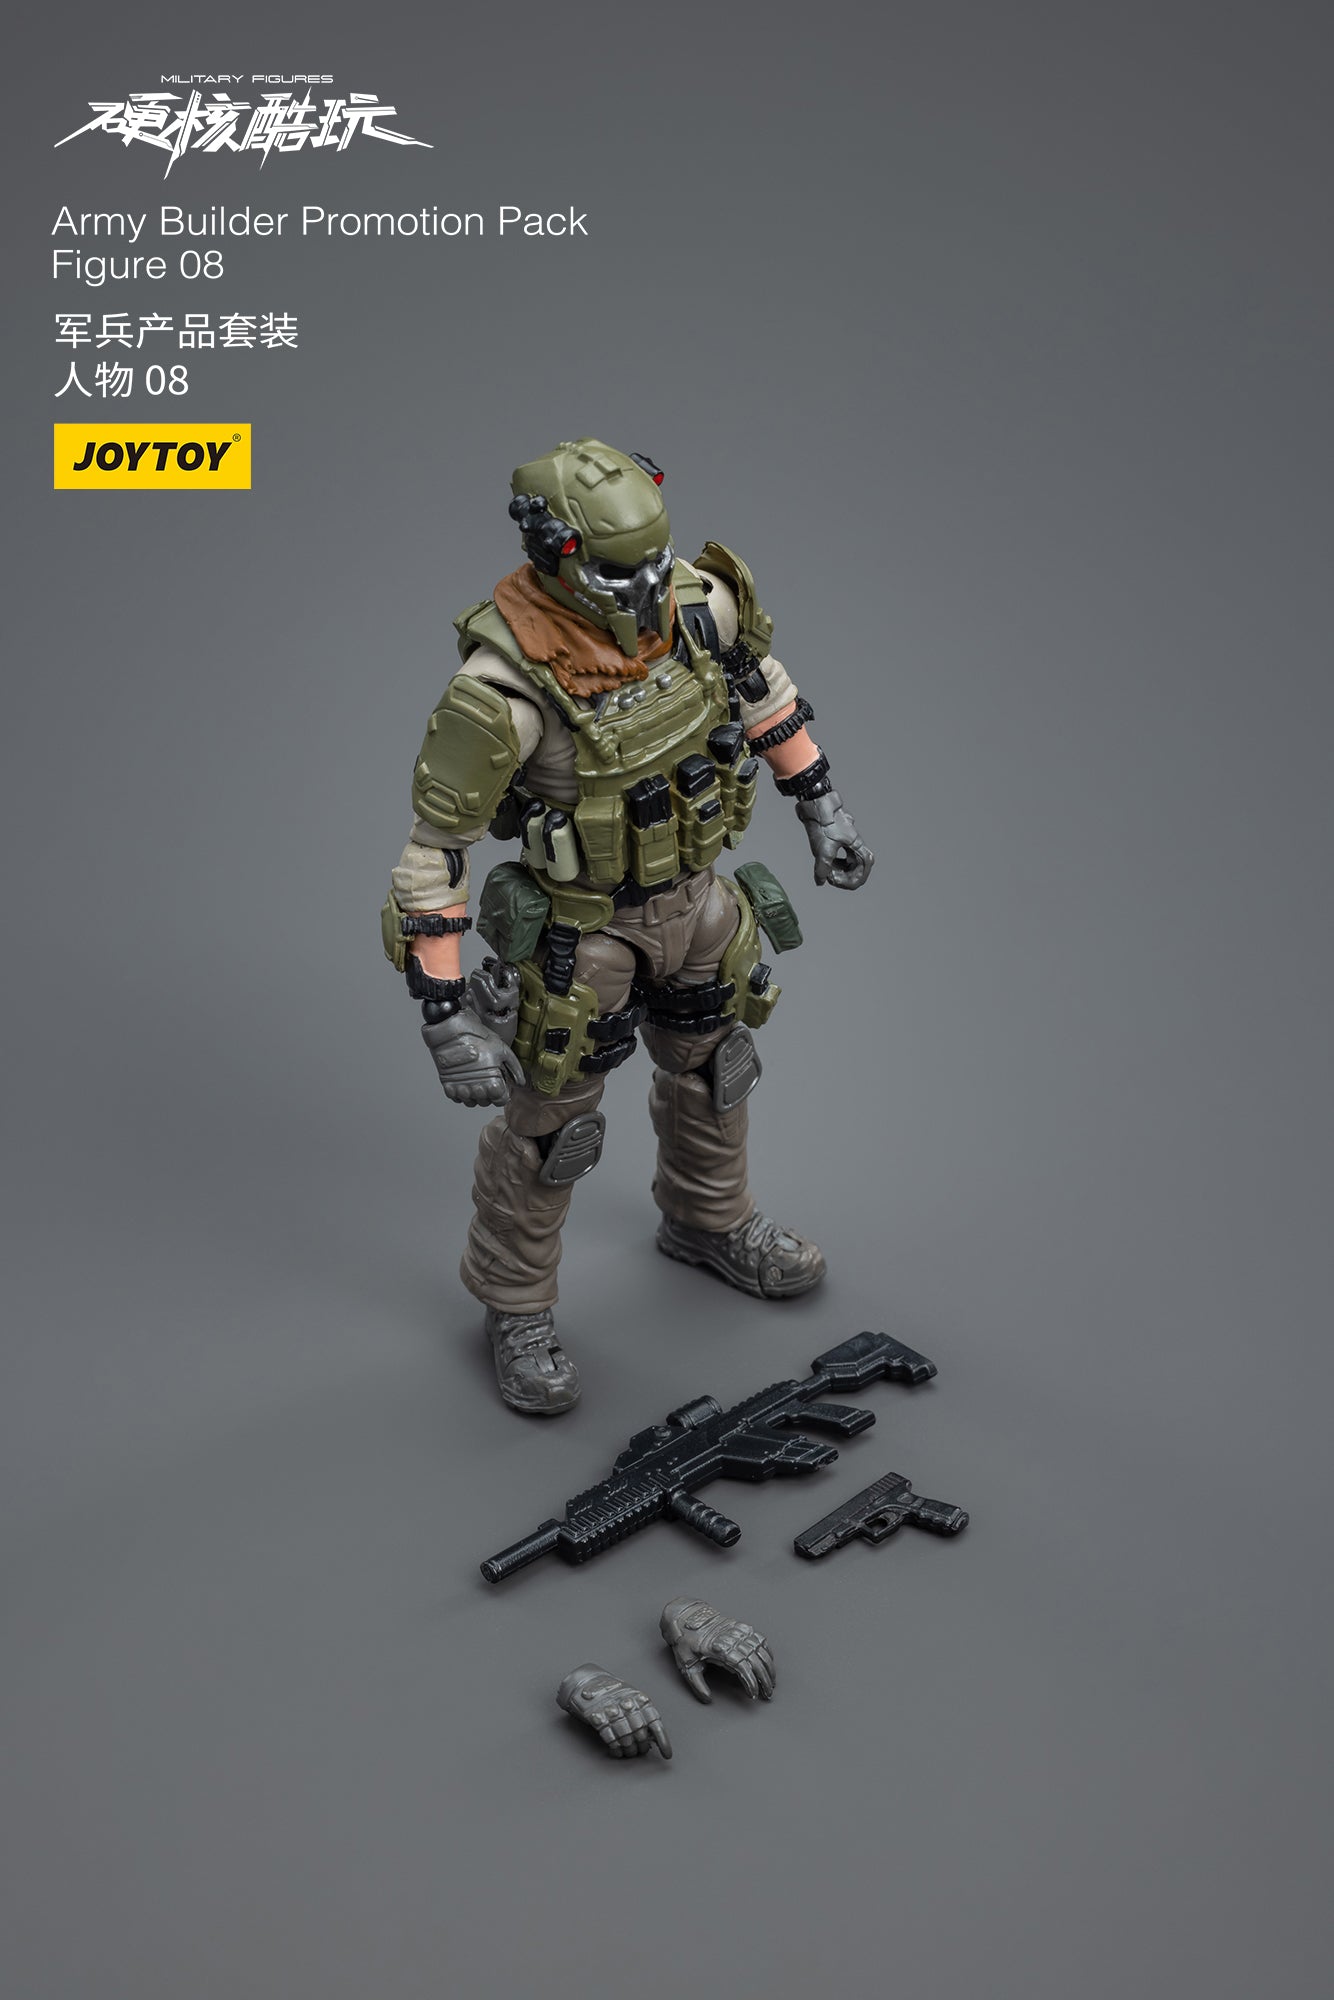 Army Builder Promotion Pack Figure 08 - Military Action Figure By JOYTOY